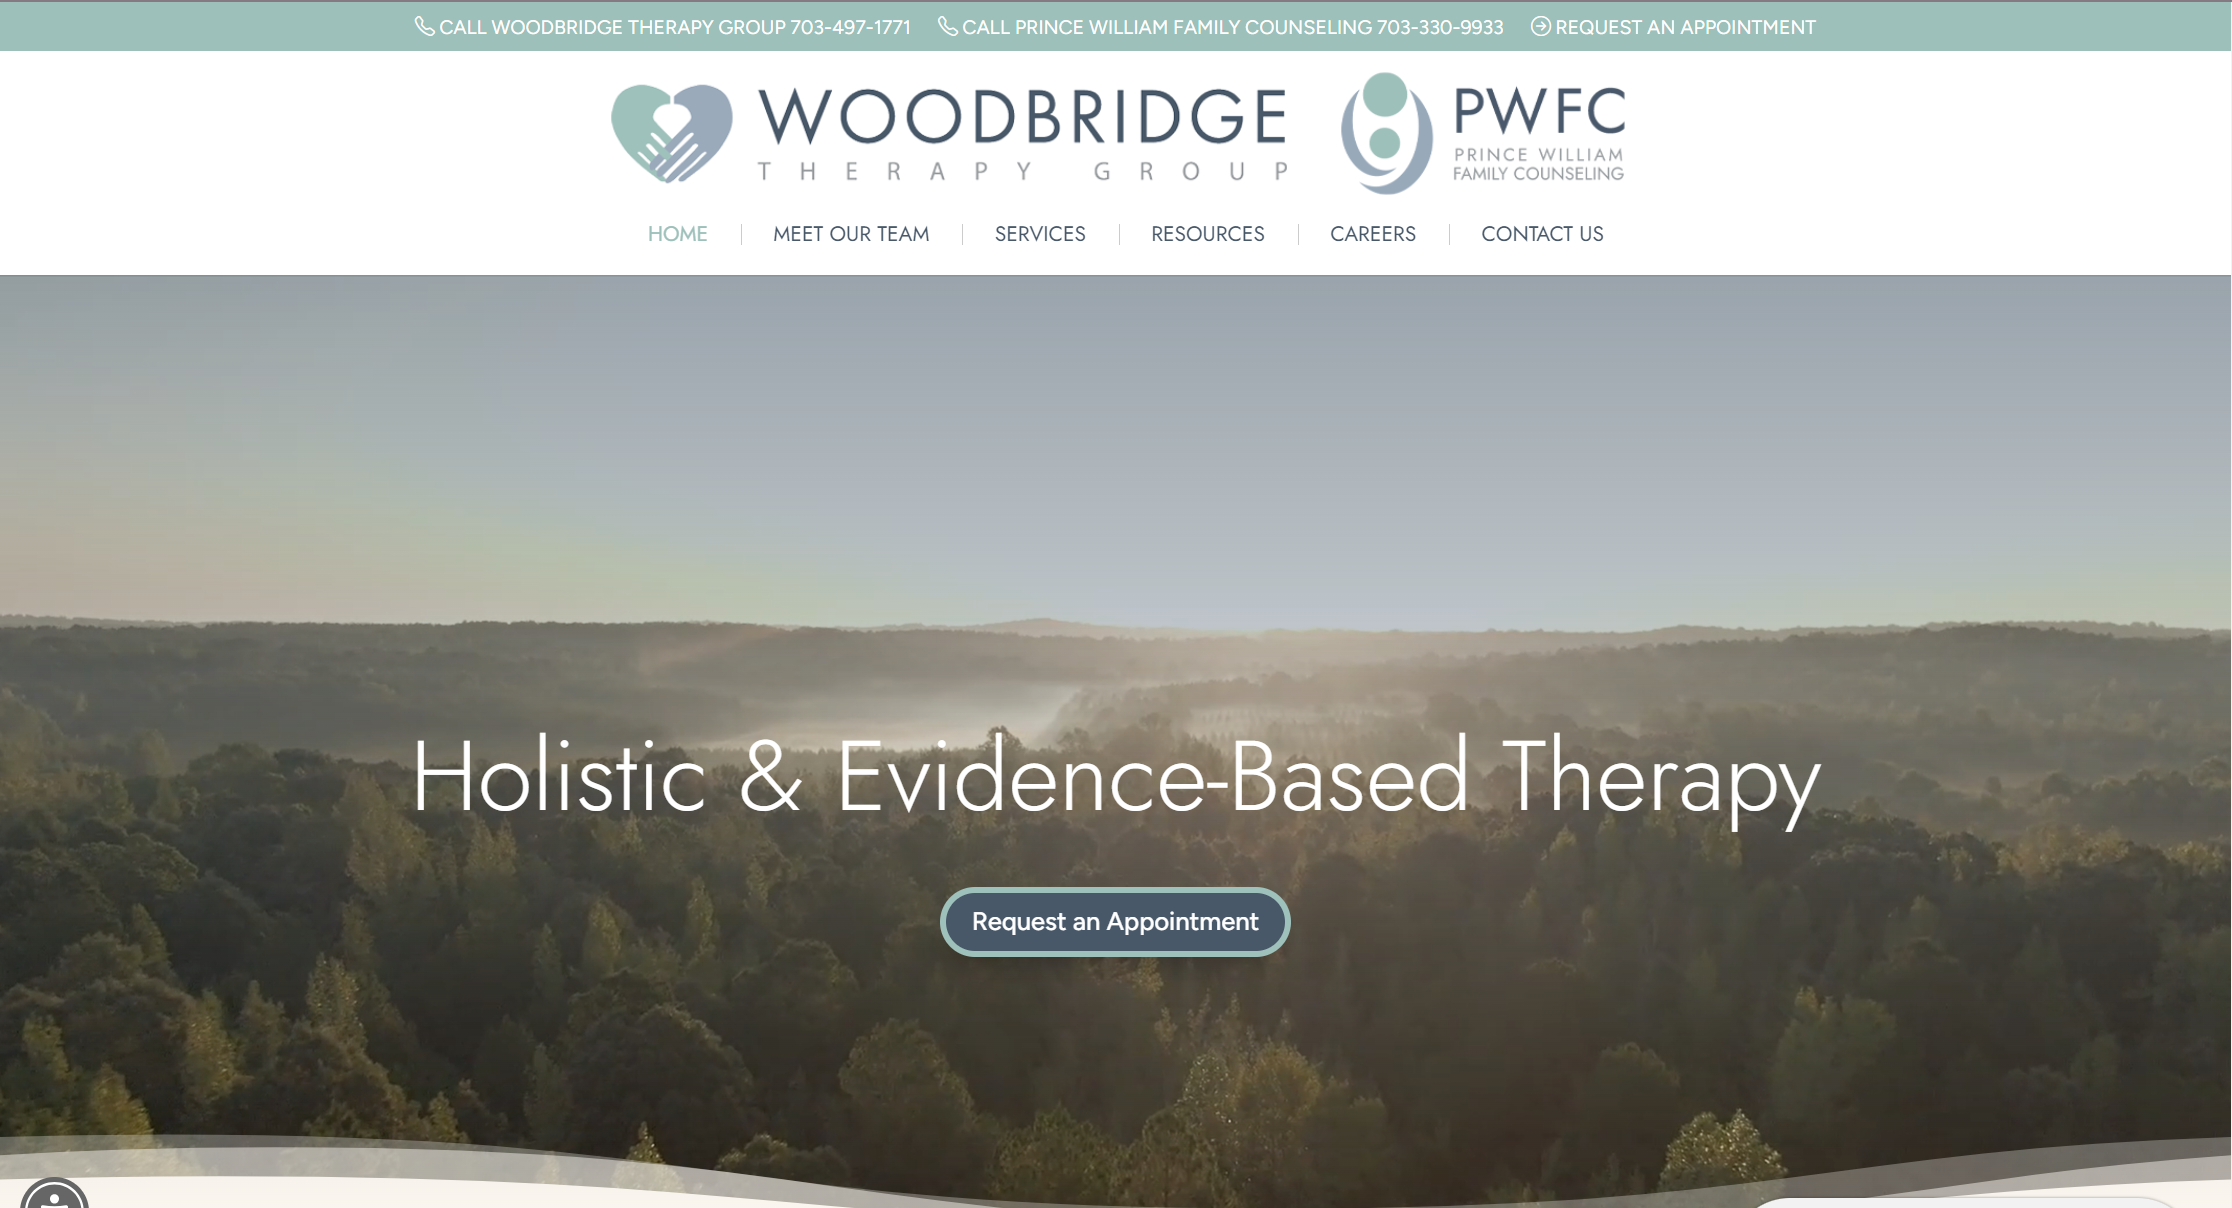 Woodbridge Therapy Group